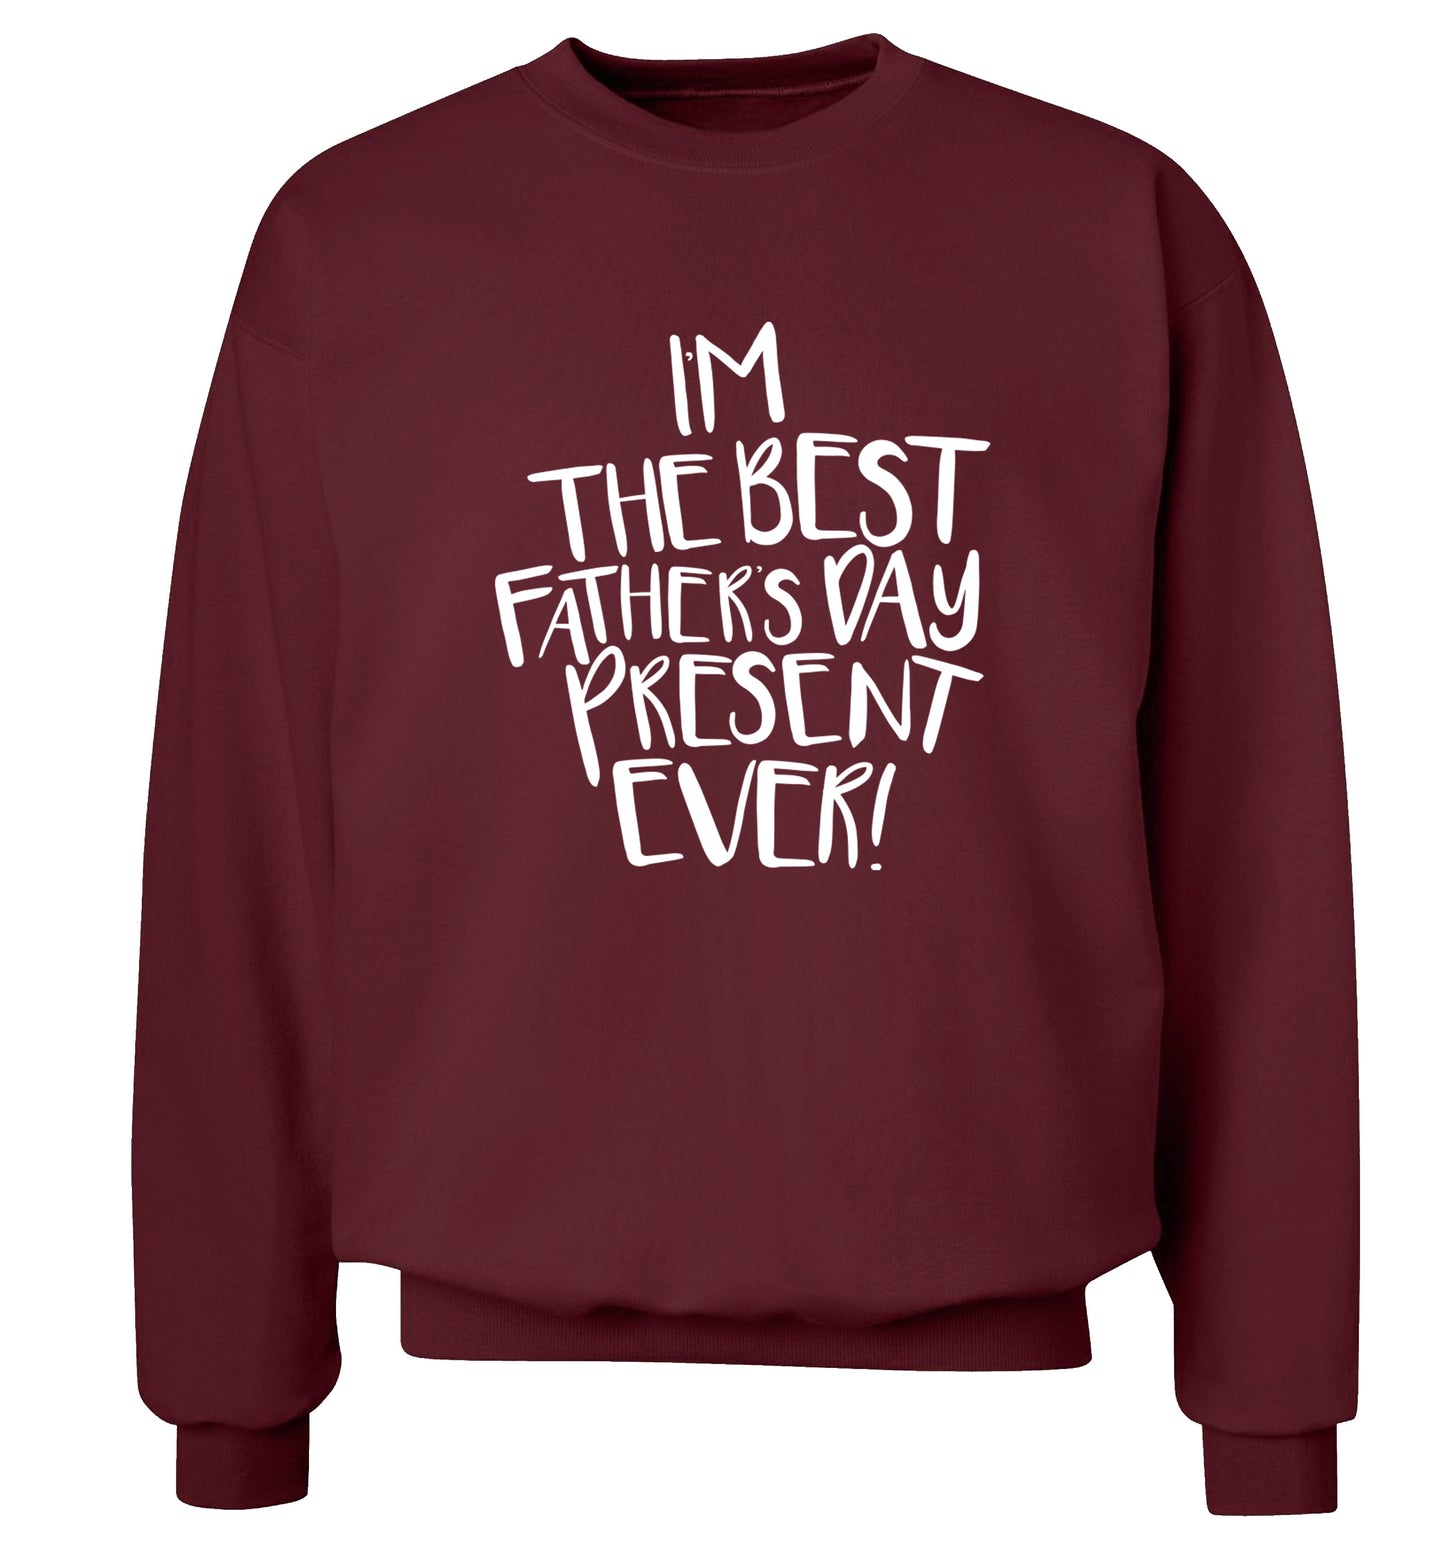 I'm the best father's day present ever! Adult's unisex maroon Sweater 2XL